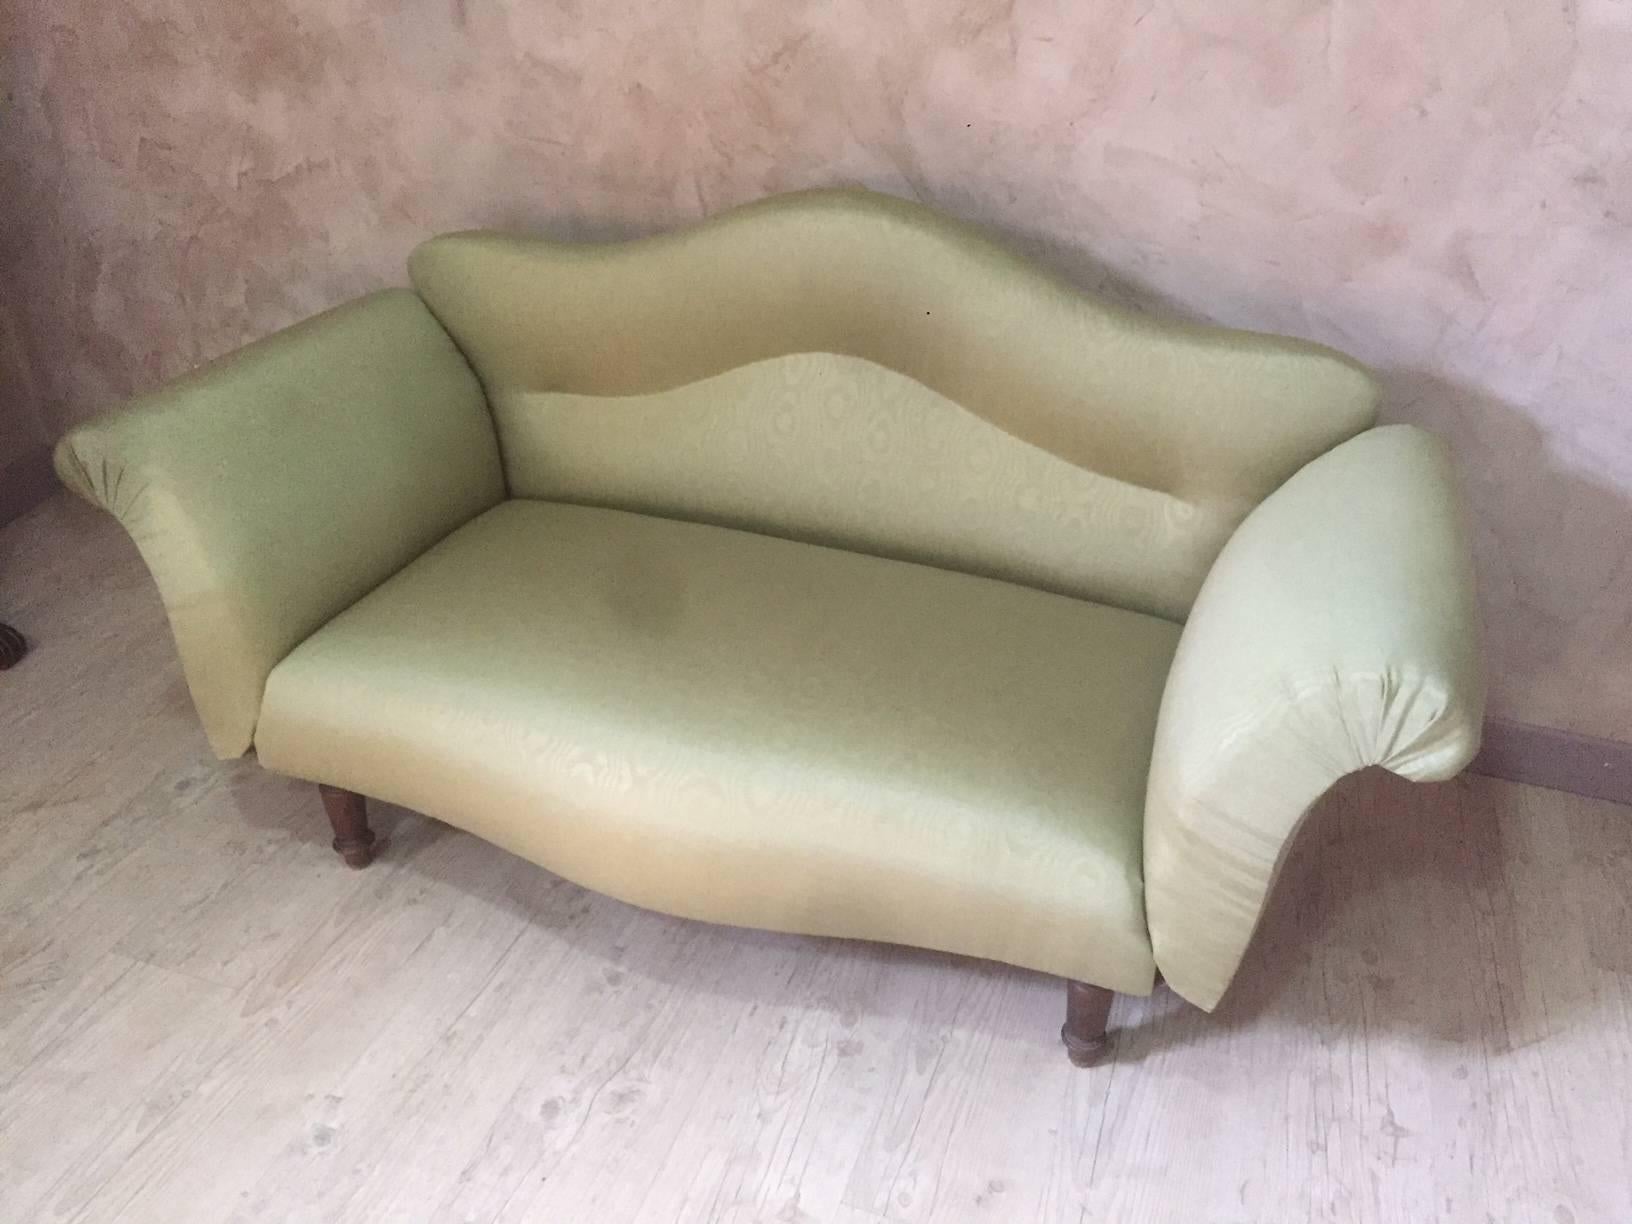 Upholstered with a Green Fabric Napoleon III Couch 1